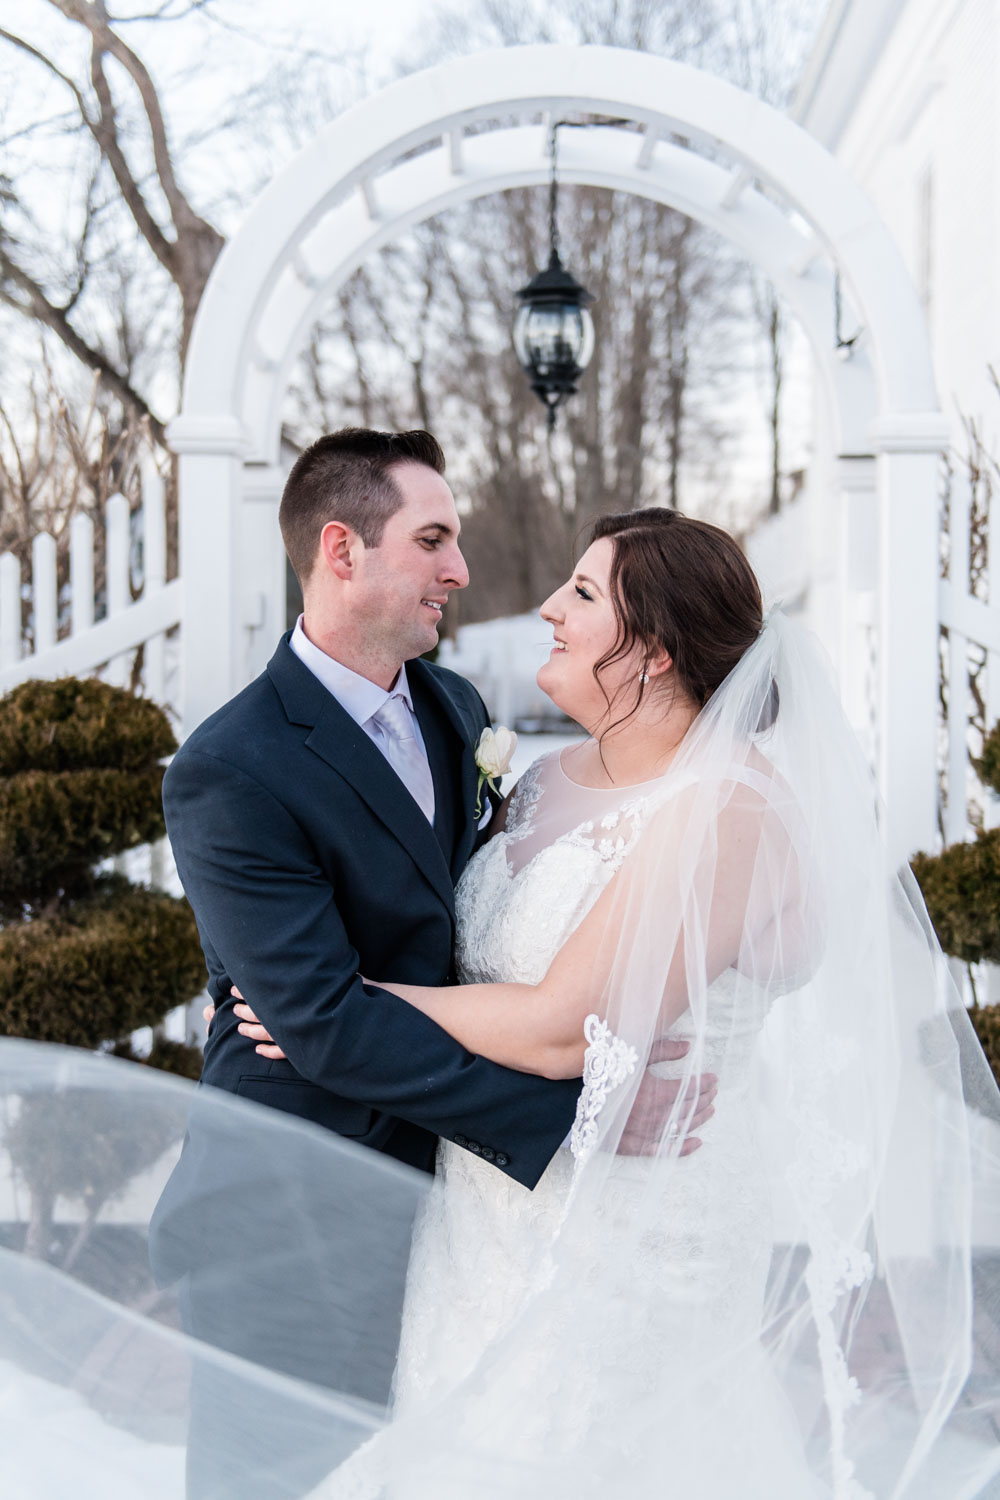 Katelyn + Joe | St. Patrick's Day Topsfield Commons Spring Wedding | Boston and New England Wedding Photography Portraits with Cathedral Veil | Lorna Stell Photo